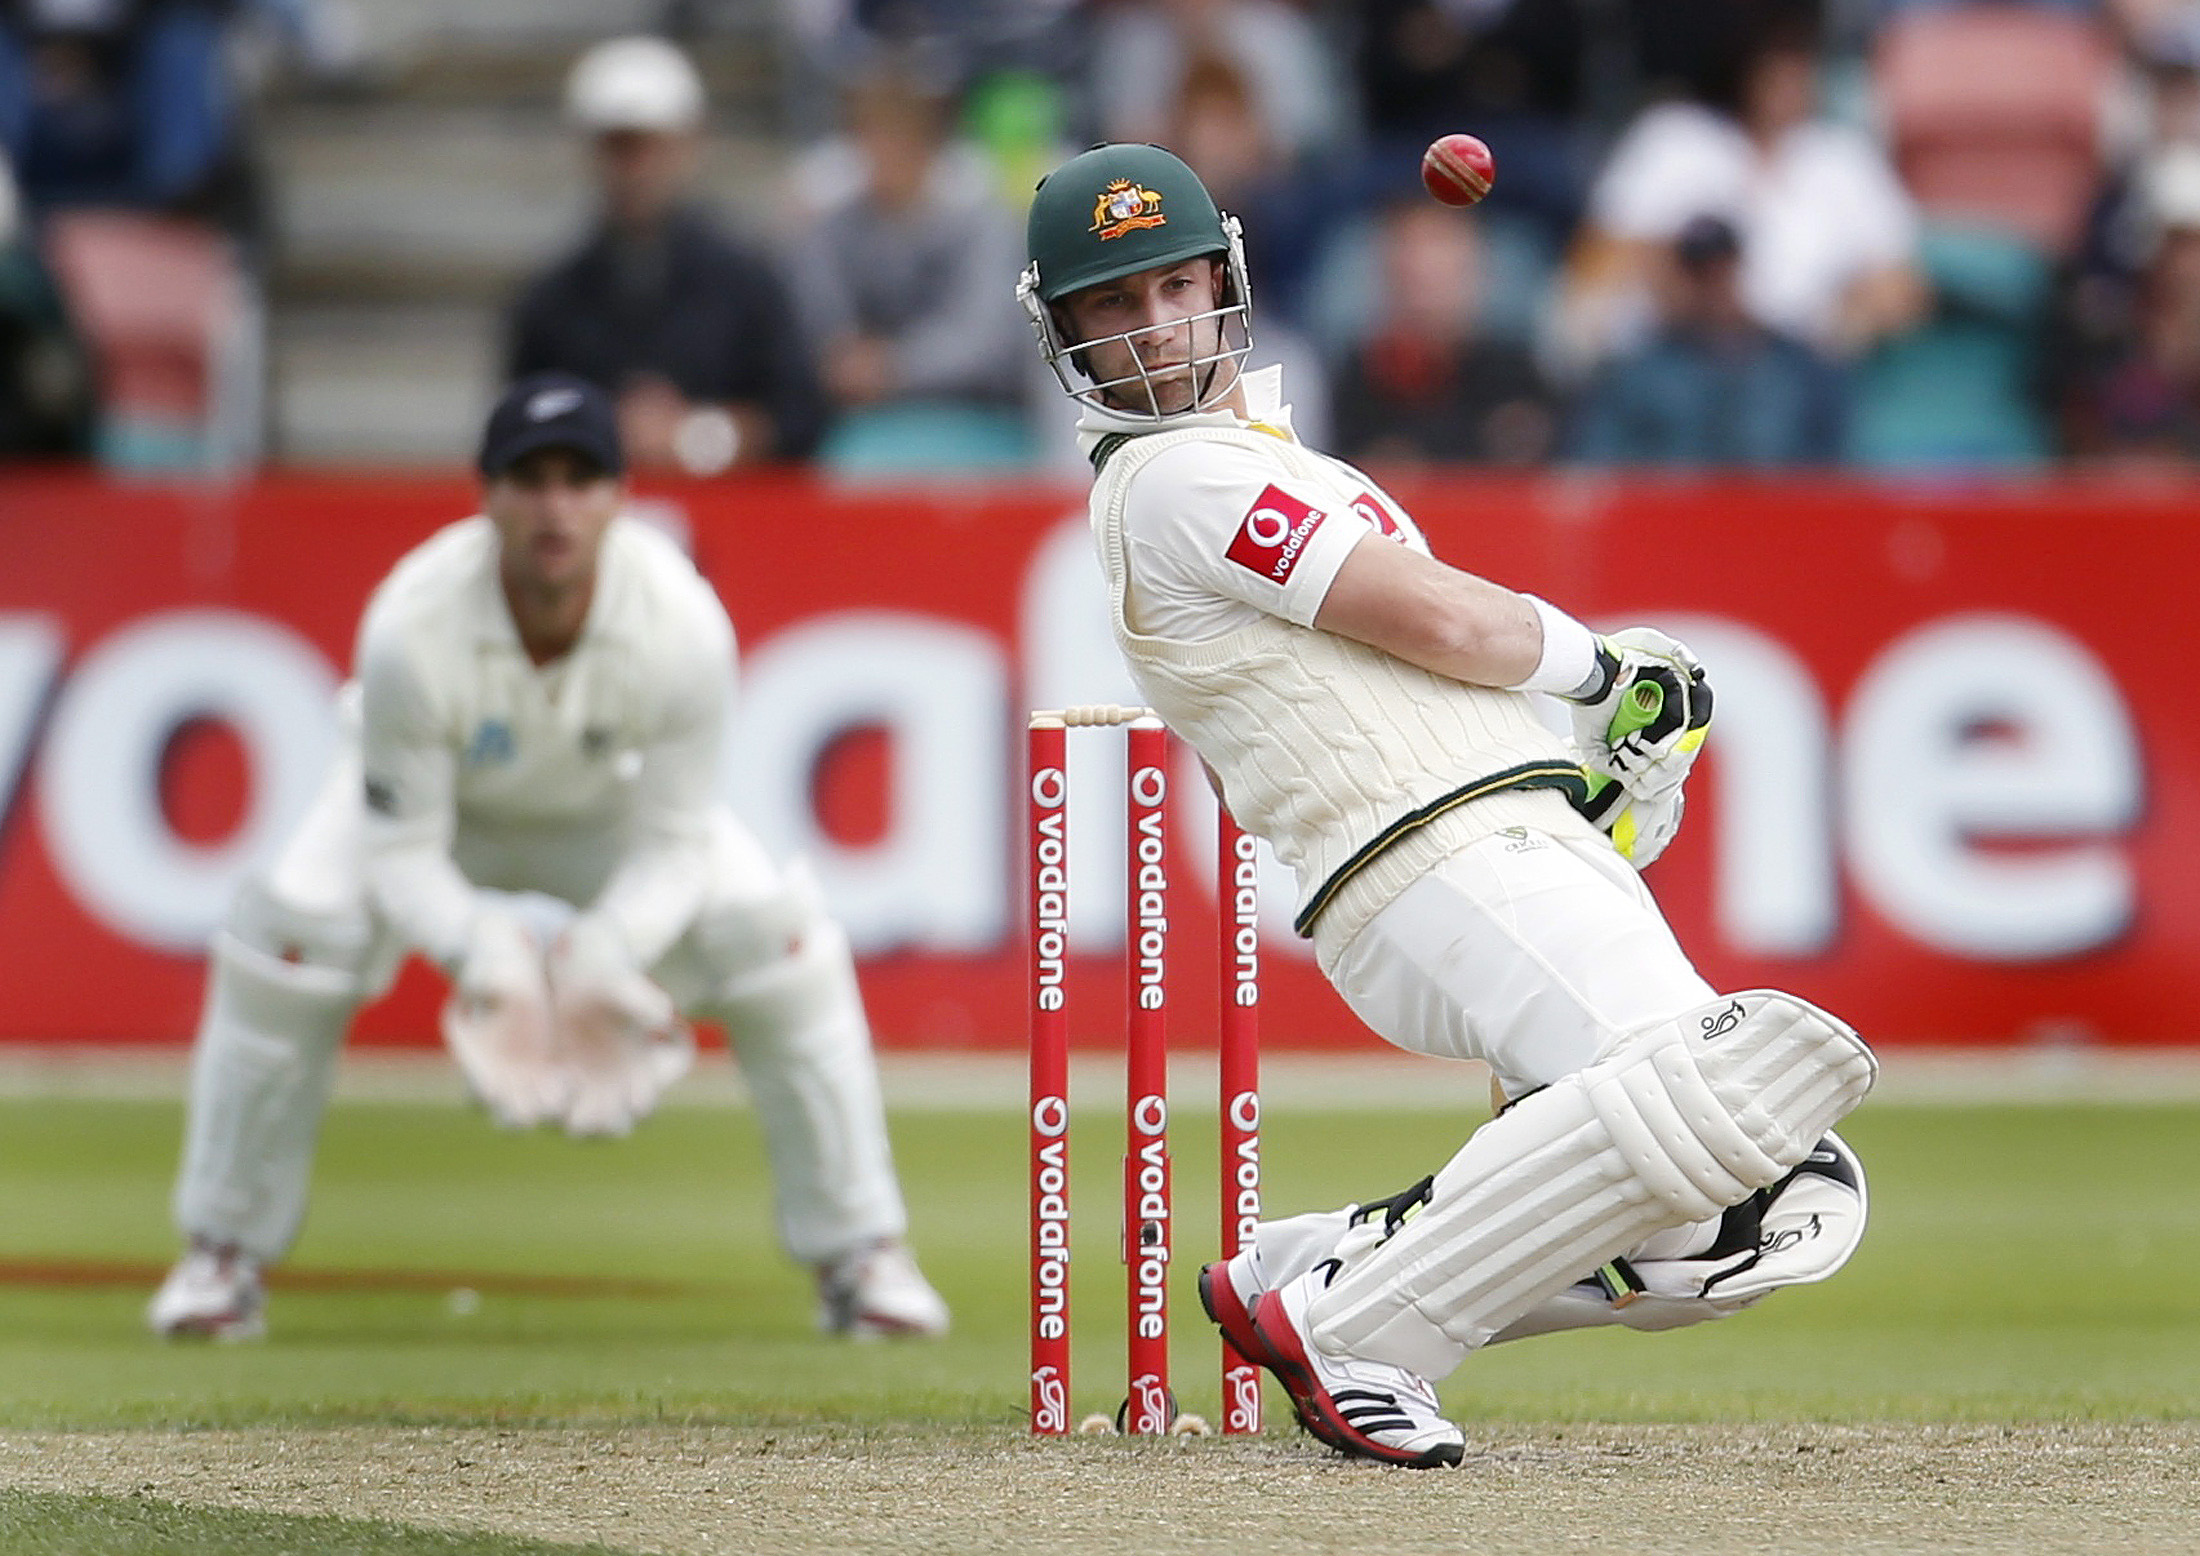 Australia's Hughes avoids a high ball during the second cricket test match against New Zealand in Hobart